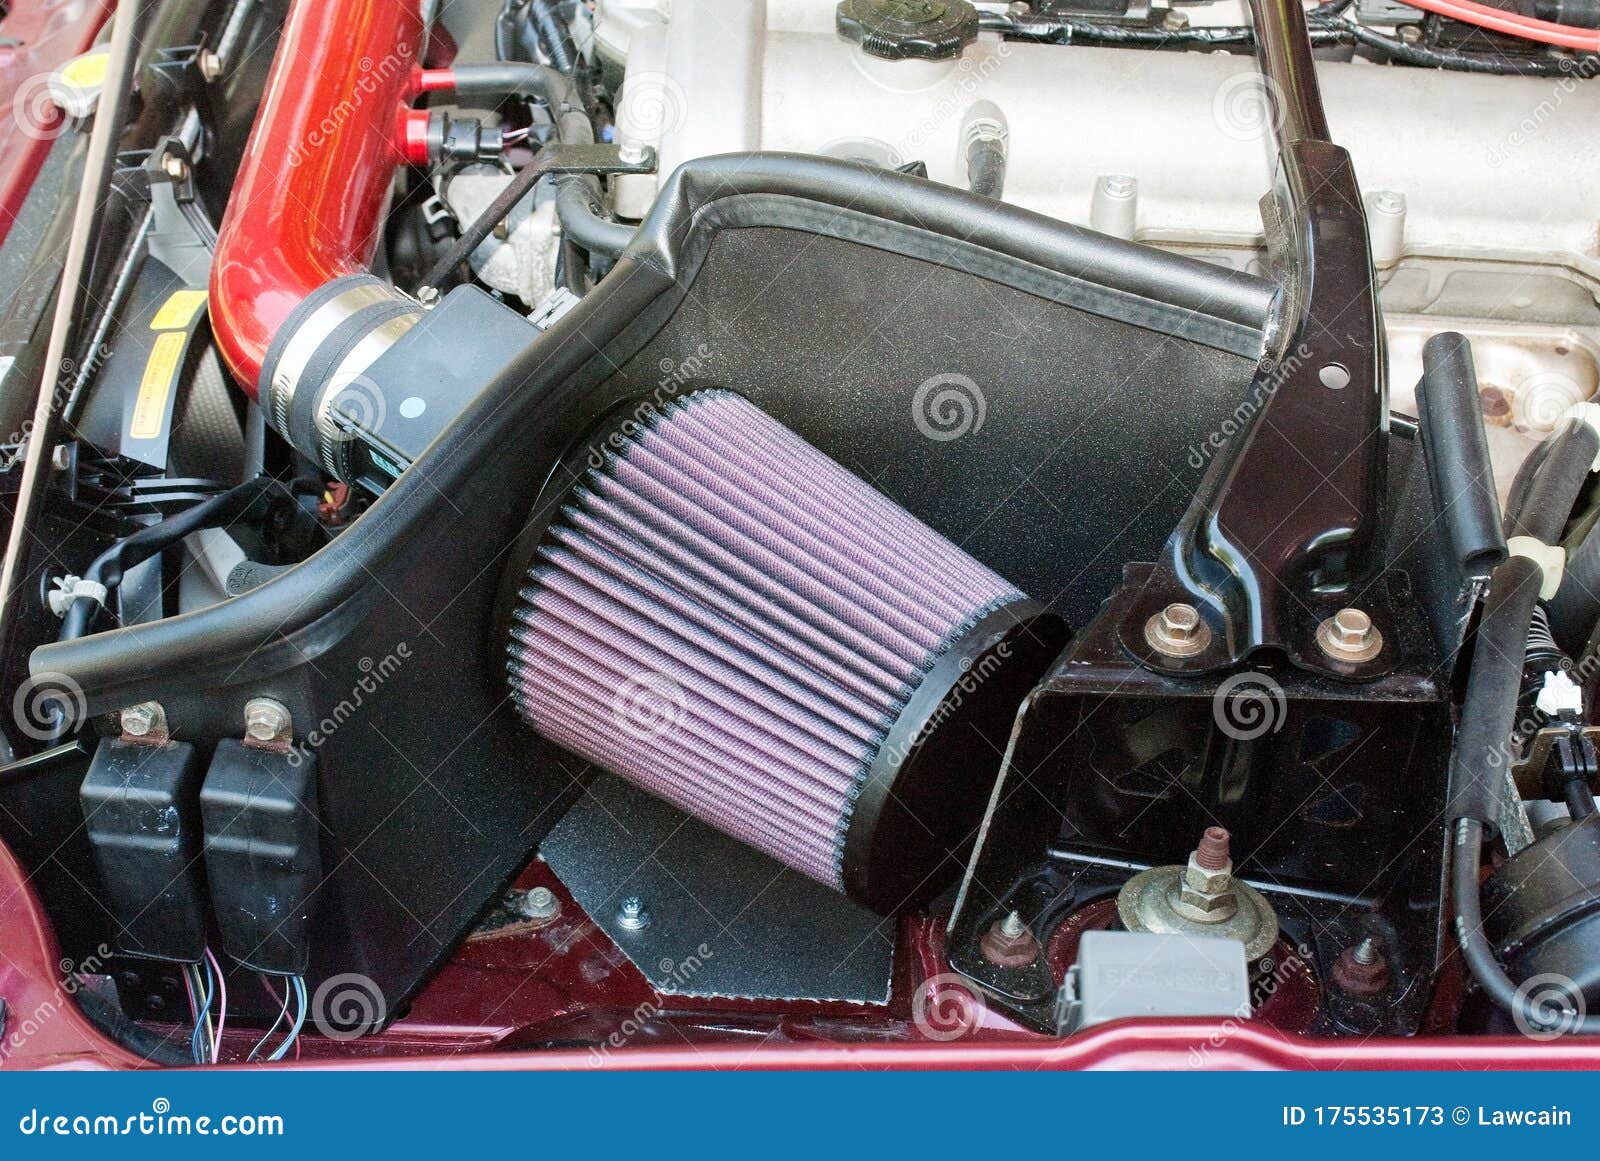 car open air intake filter with diy heat shield